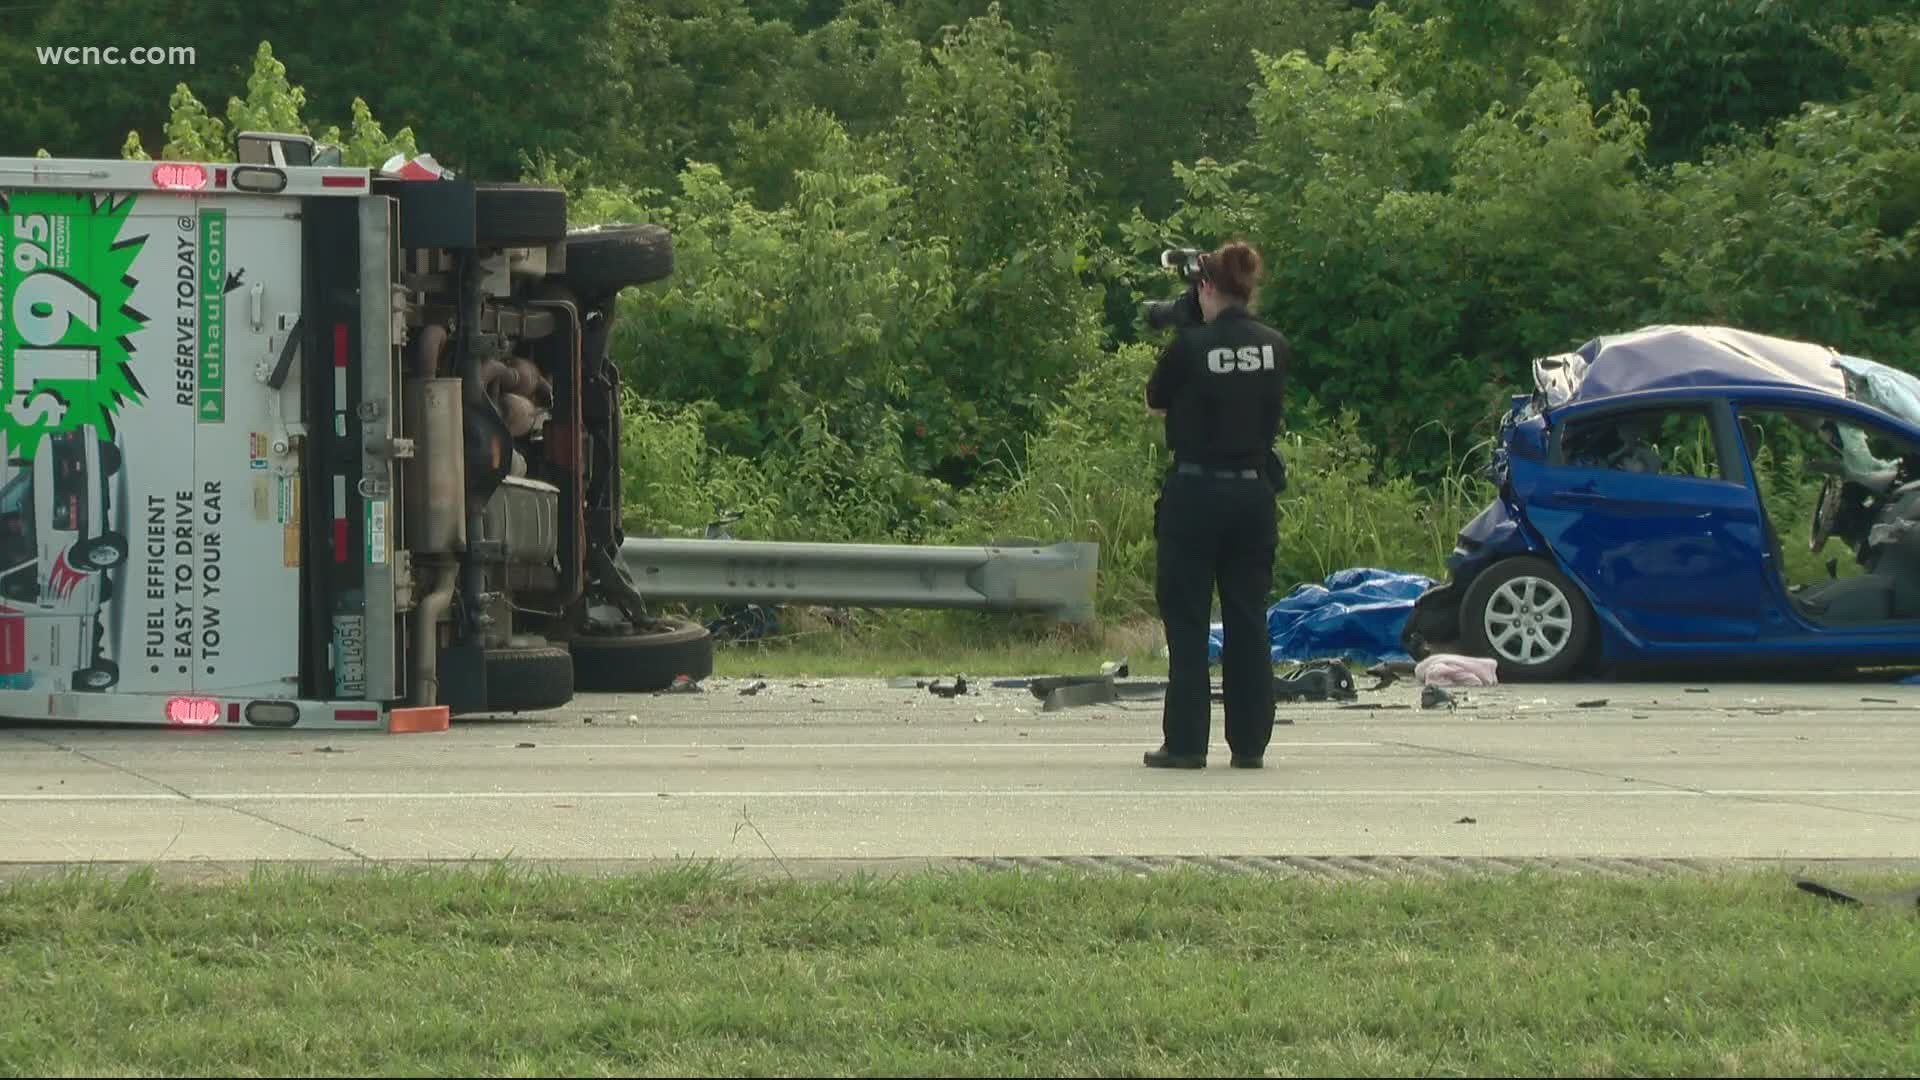 A tragic crash Sunday kills one woman and sends an infant to the hospital in critical condition.